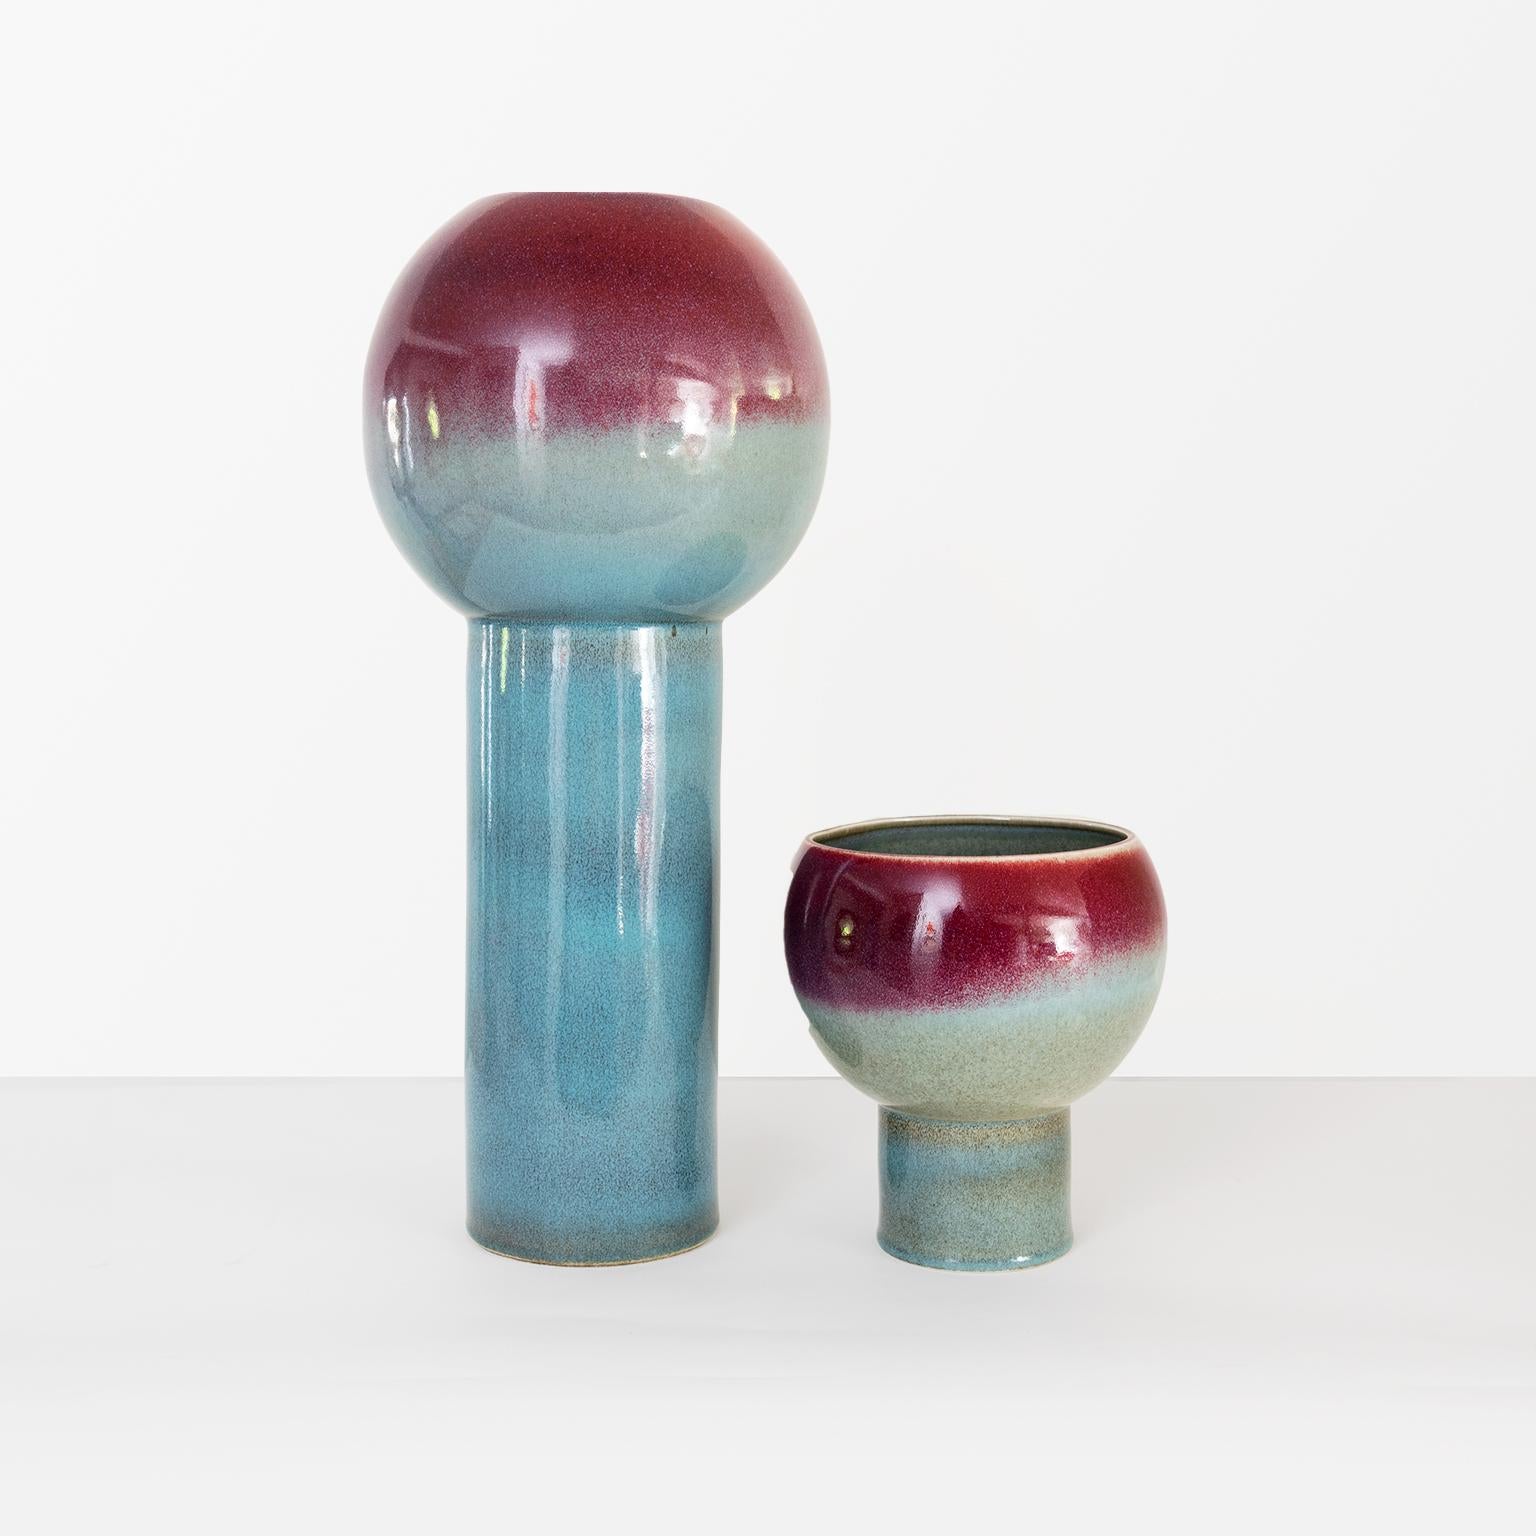 Two large midcentury Swedish vases circa 1960 from Rörstrand. These are attributed to Inger Persson but not signed by her. 

Left: Height 25”, diameter 11”

Right: Height 10”, diameter 9”.